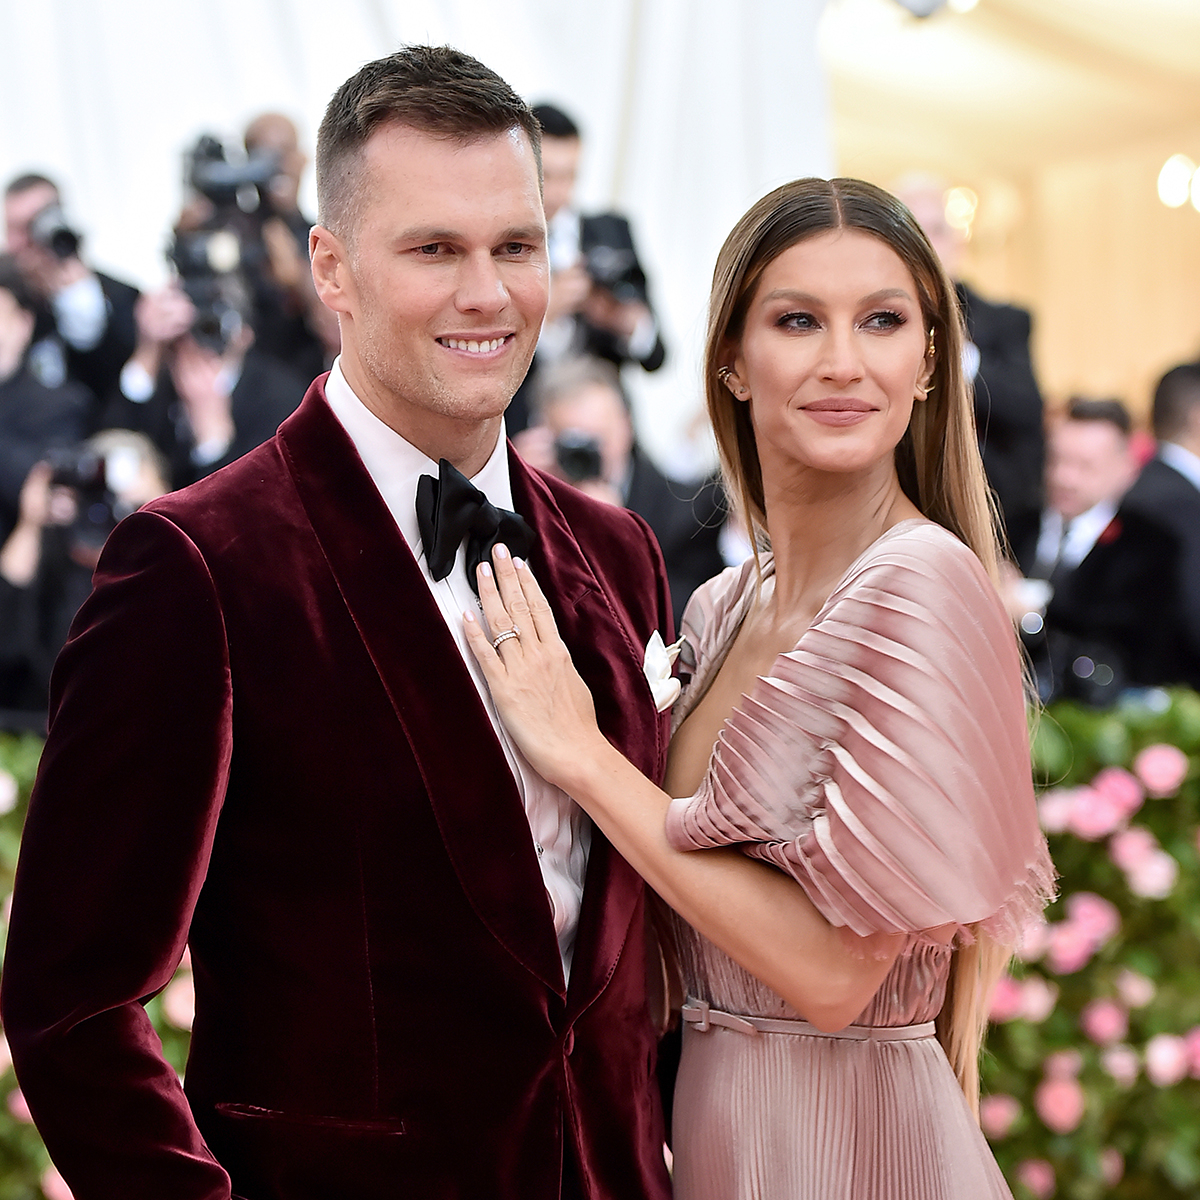 Gisele Bündchen Says Tom Brady Lets Her “Take the Reins” in the Family